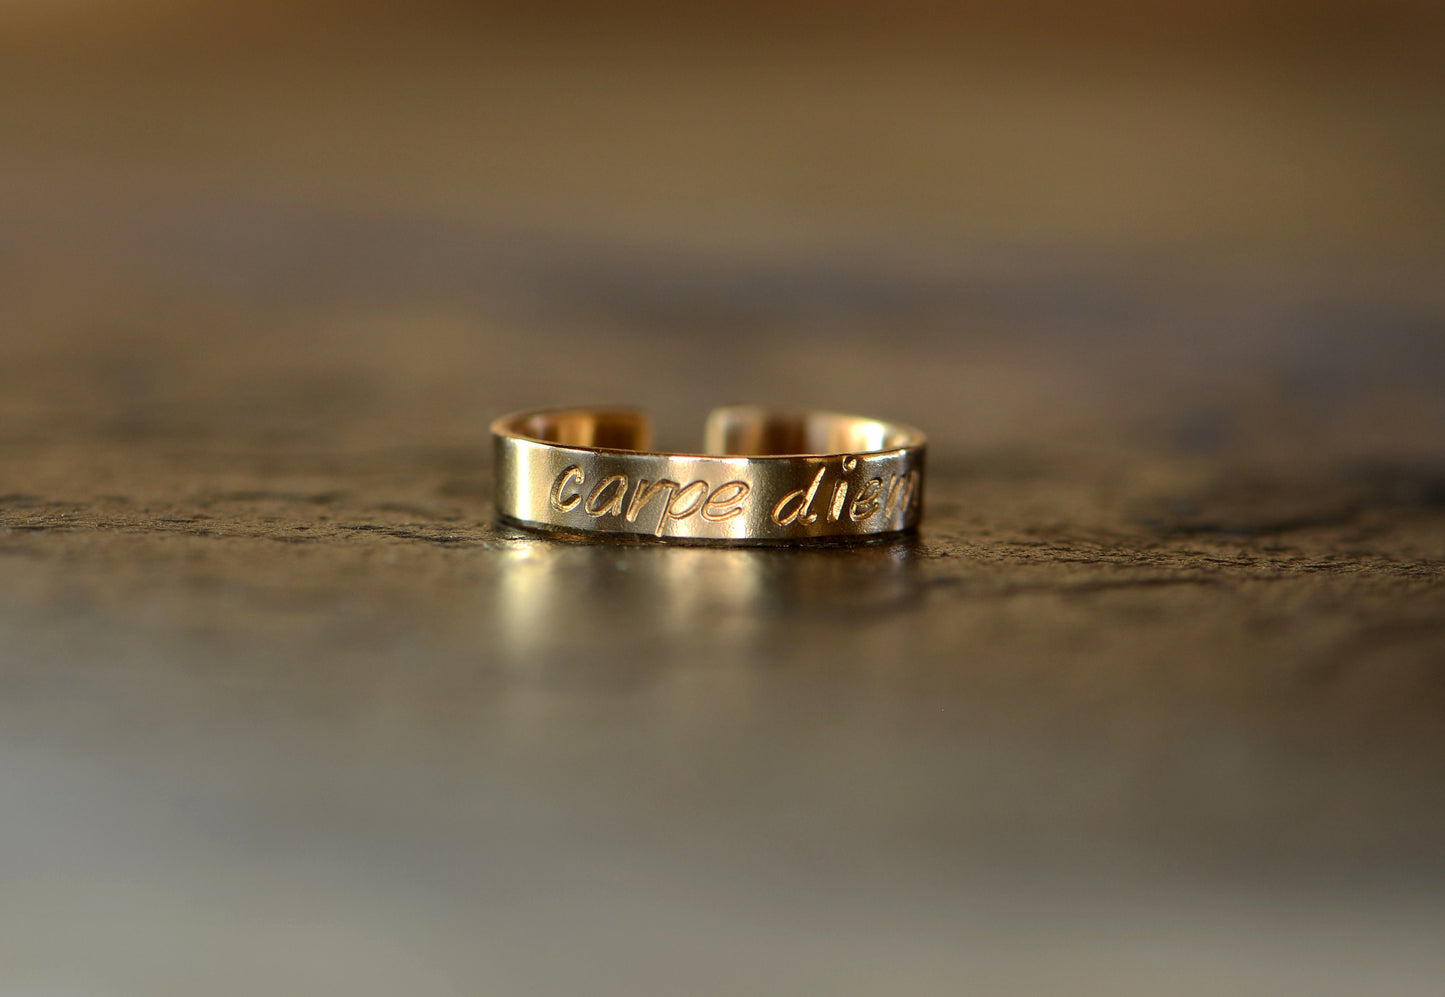 Yellow 14k gold toe ring stamped with carpe diem - can be worn as a midi ring or pinky ring